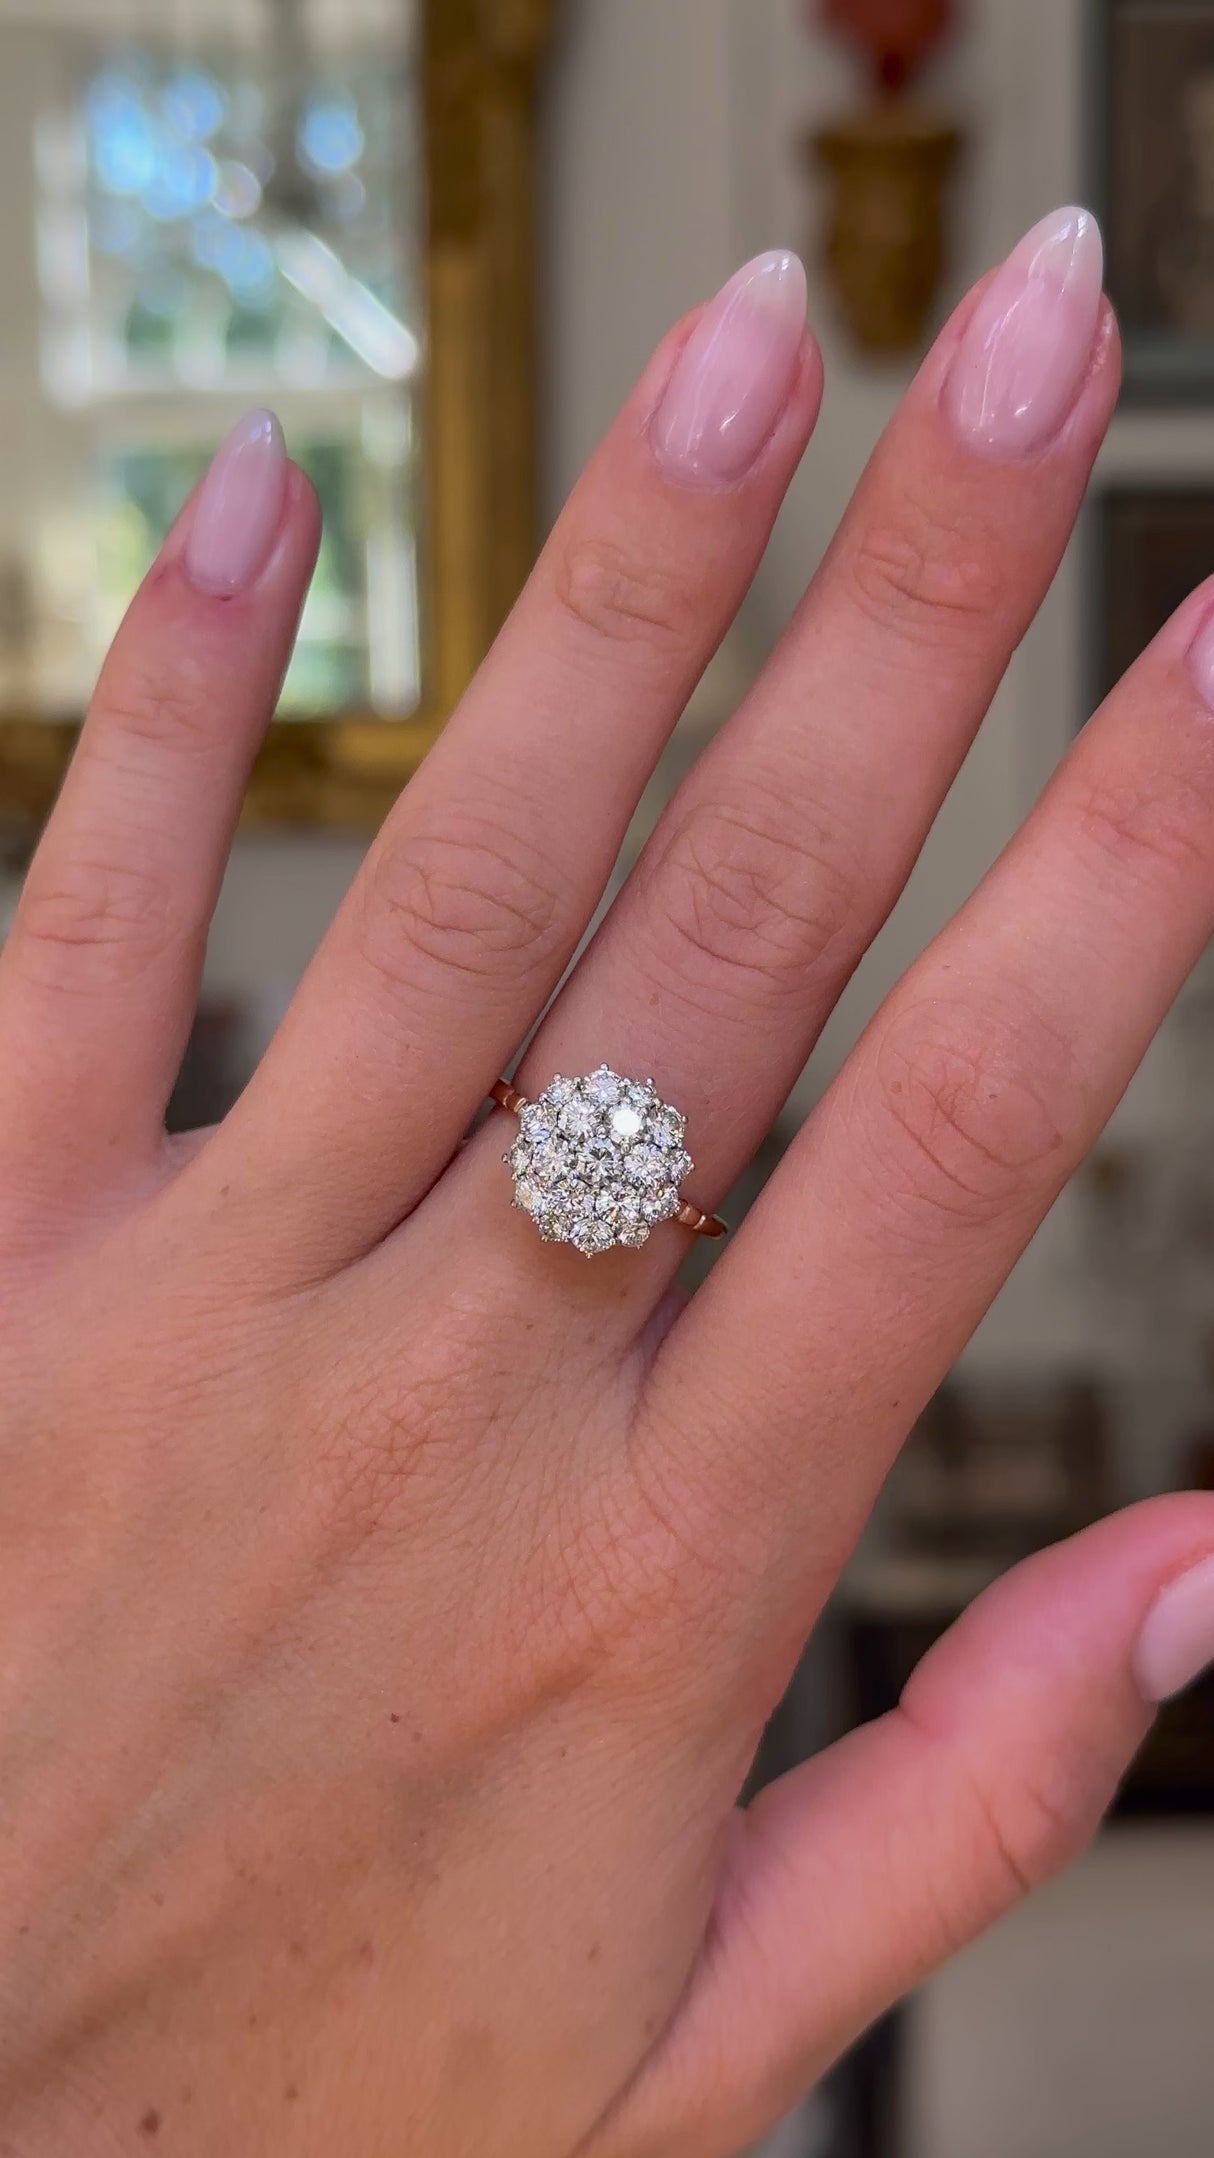 1980s diamond cluster engagement ring worn on hand and moved around to give perspective.